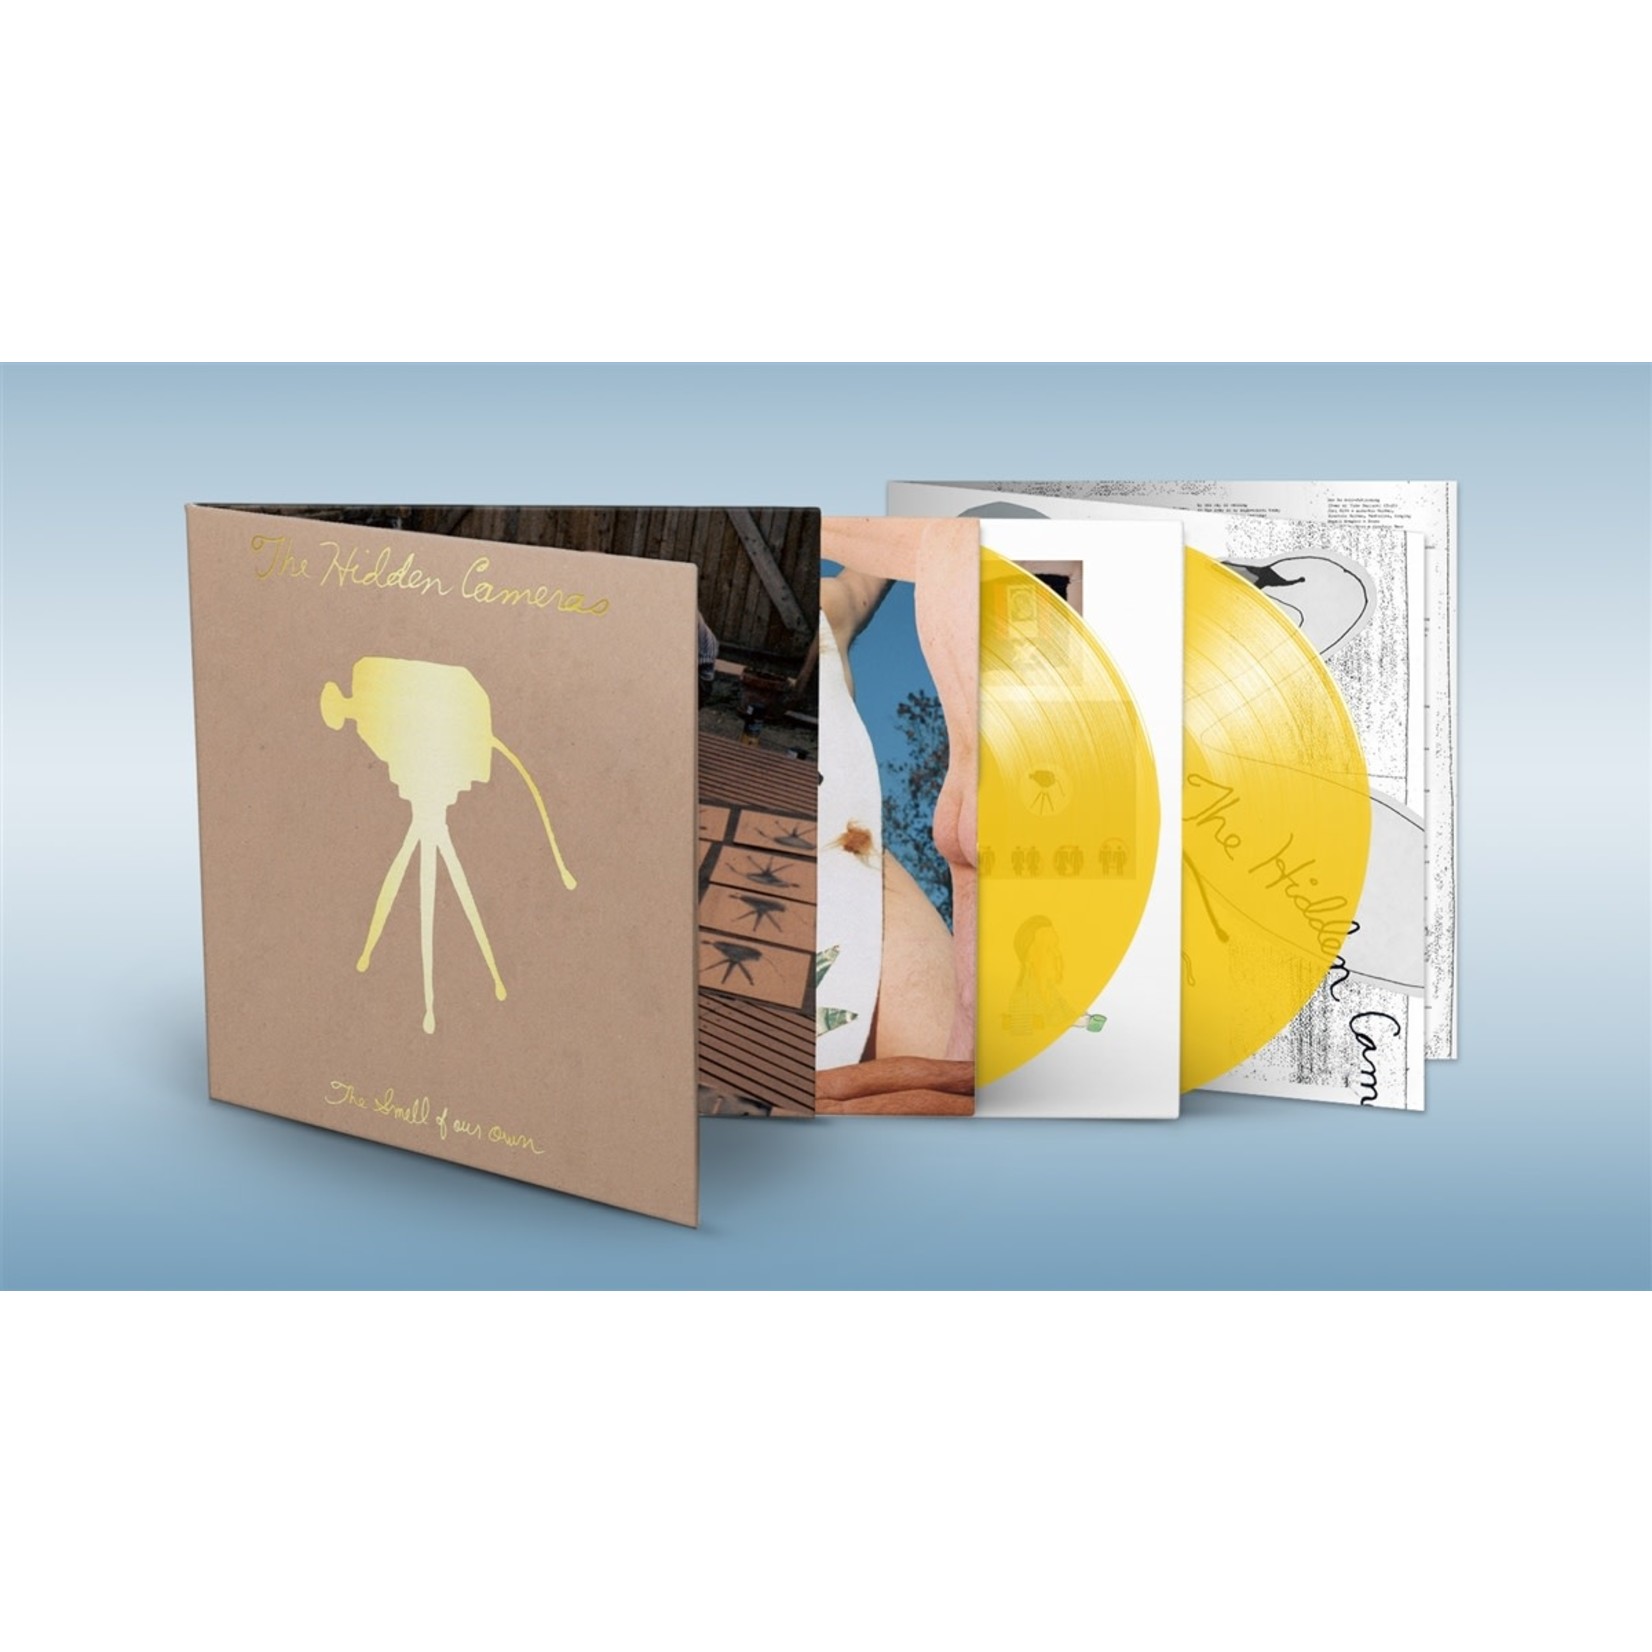 Rough Trade Hidden Cameras - The Smell of Our Own (2LP) [Yellow]